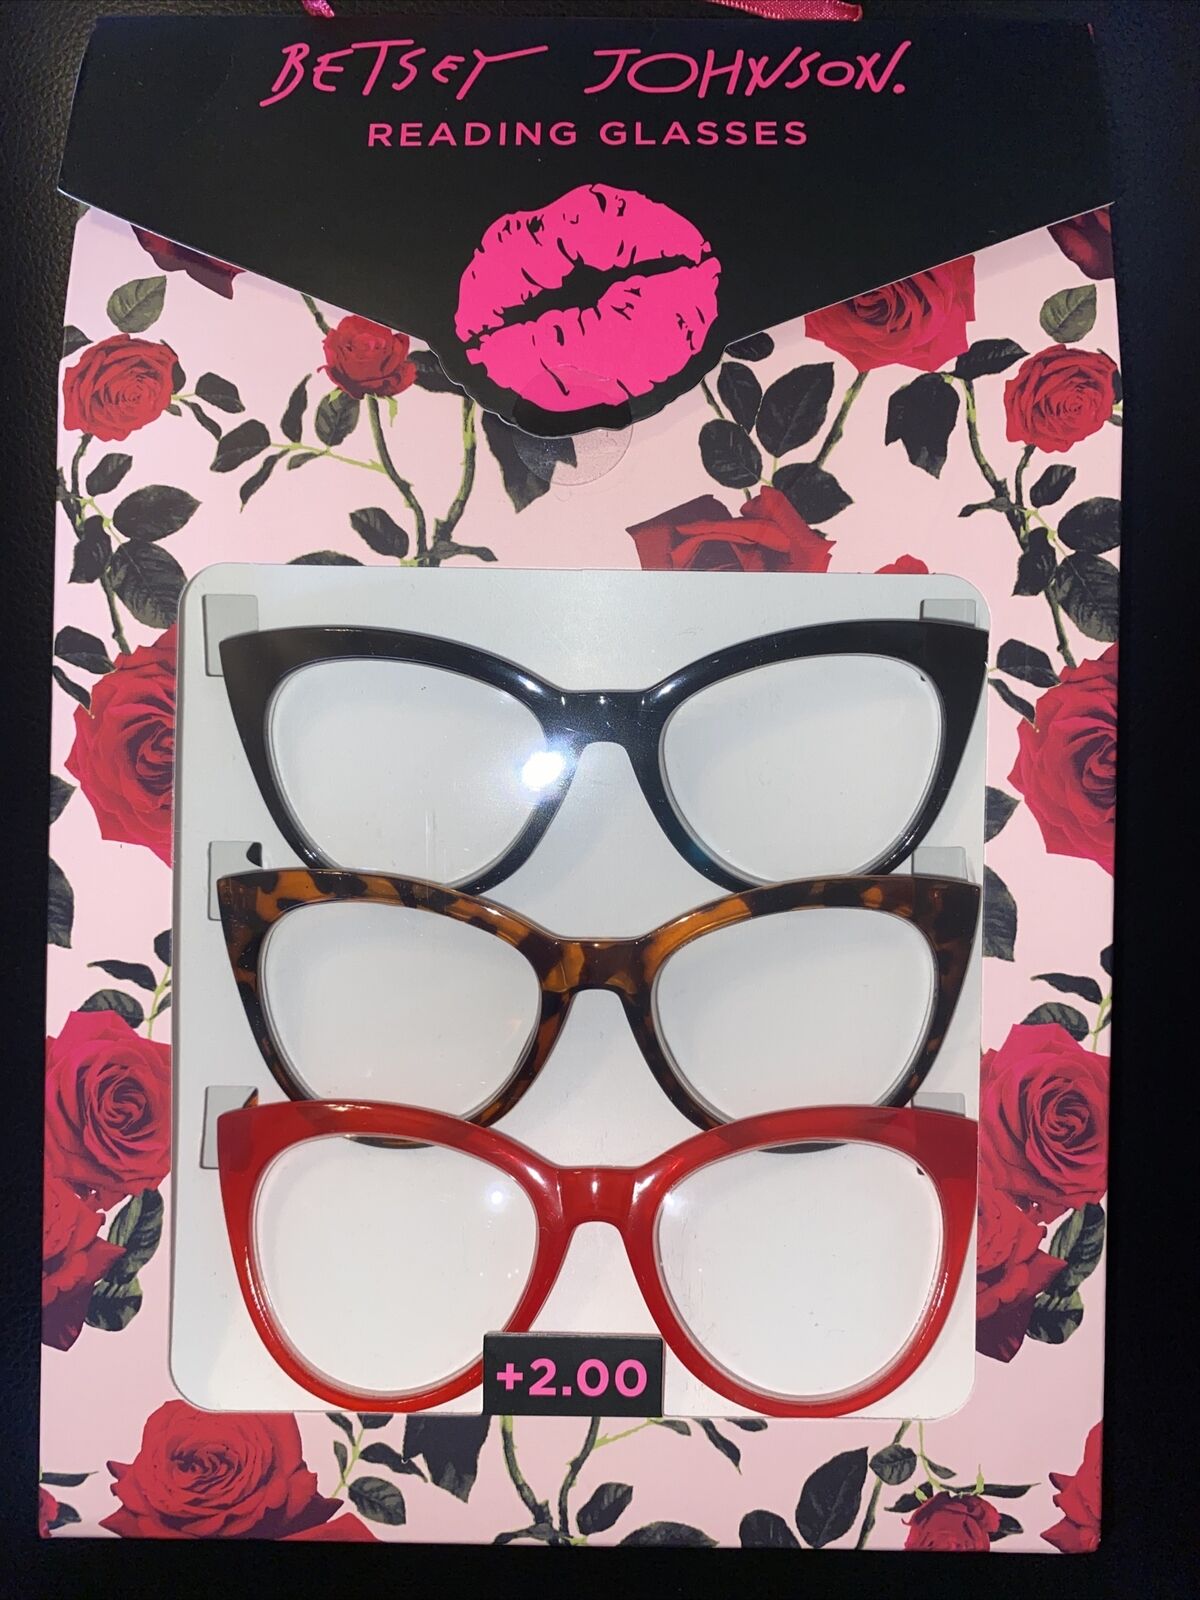  Betsey Johnson 3 PAIR Reading Glasses LARGE CAT EYE thick Red Readers +2.00